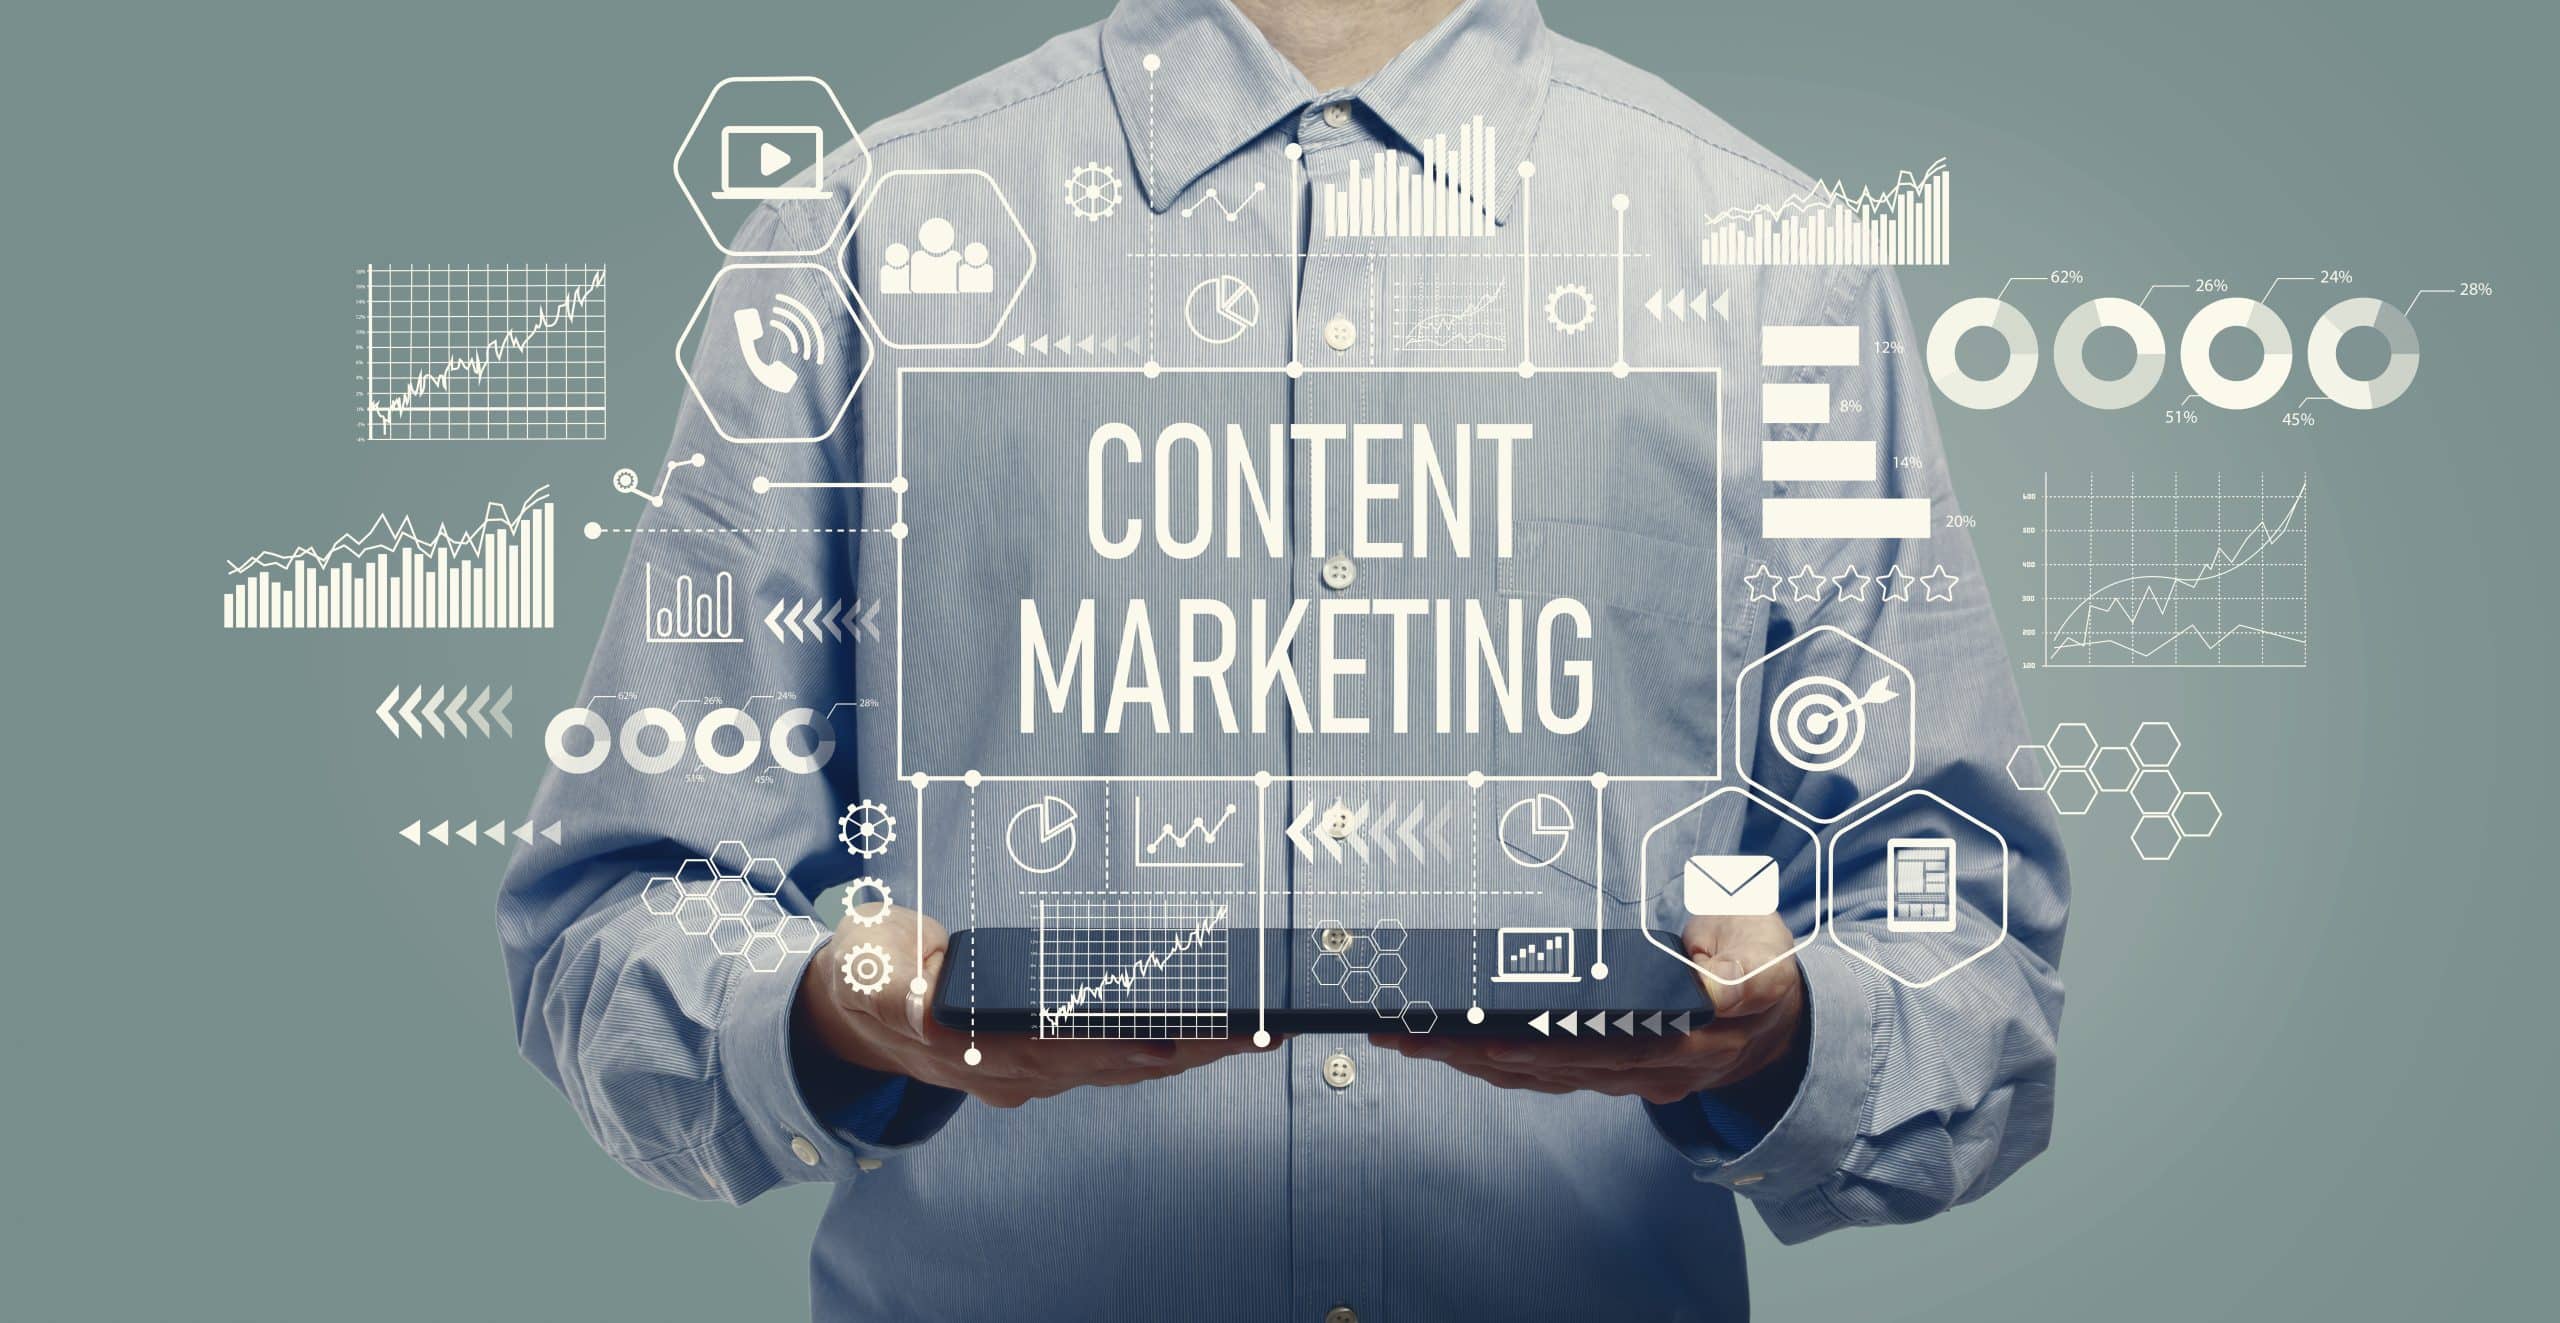 Is Content Marketing Right for My Industry?